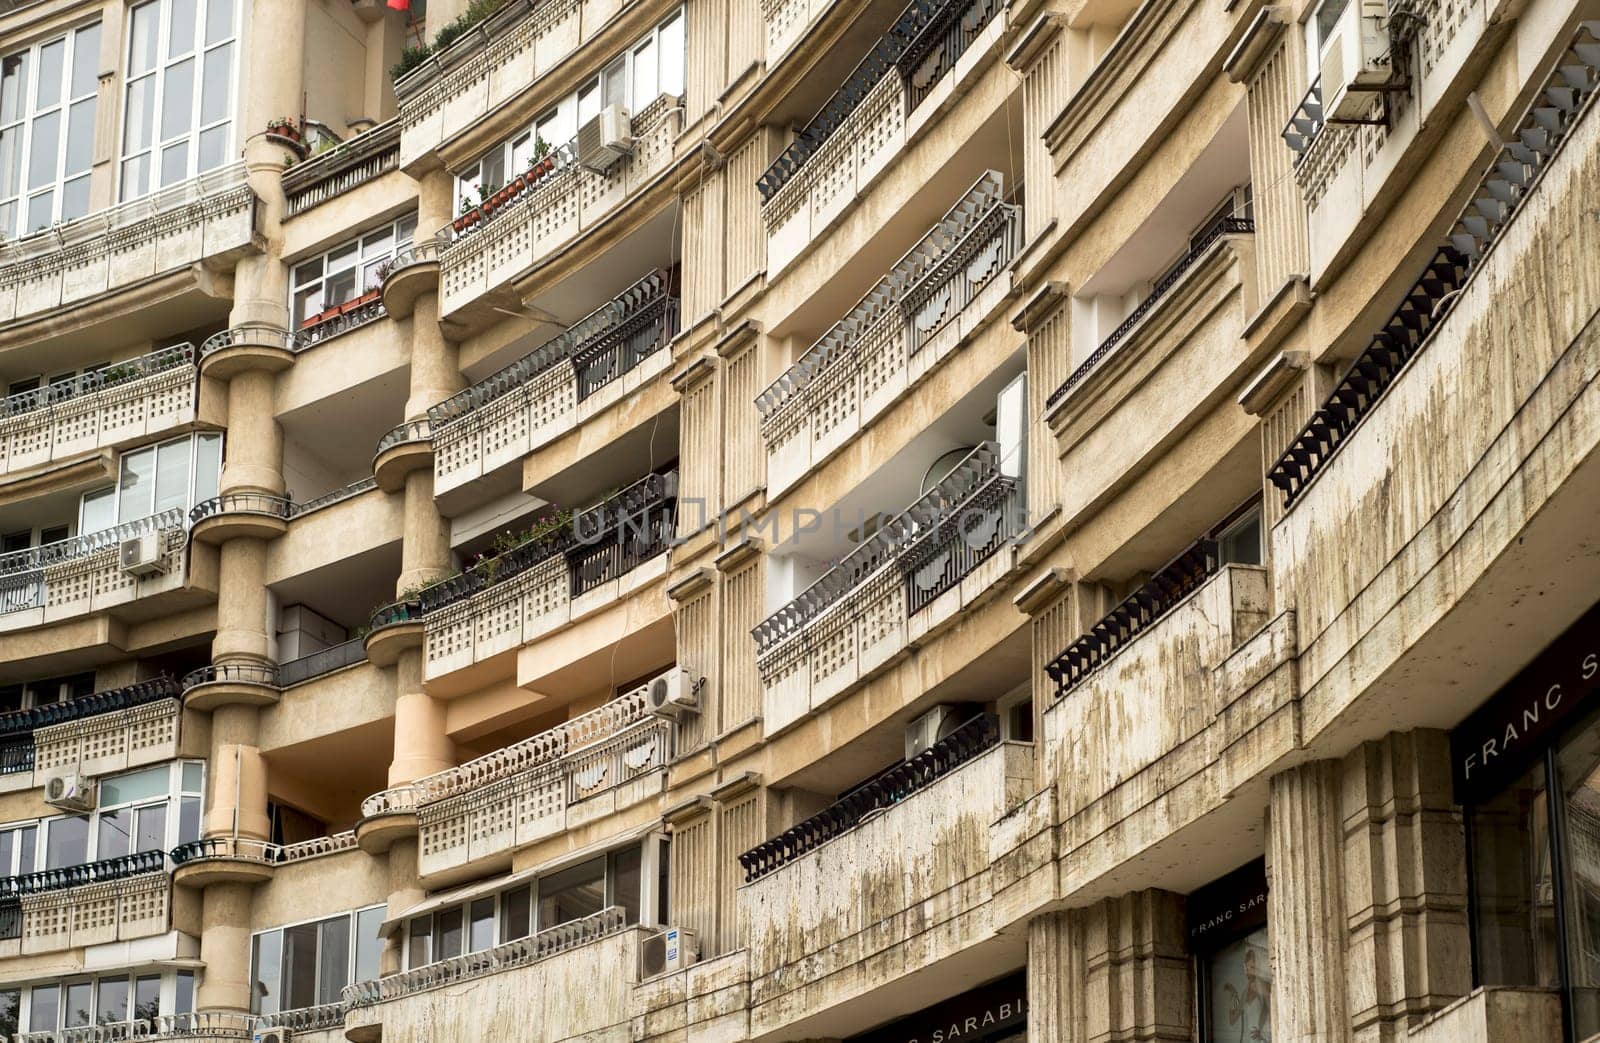 houses balconies of bucharest street. Close up detail with a old built apartment building in Bucharest, Romania by aprilphoto